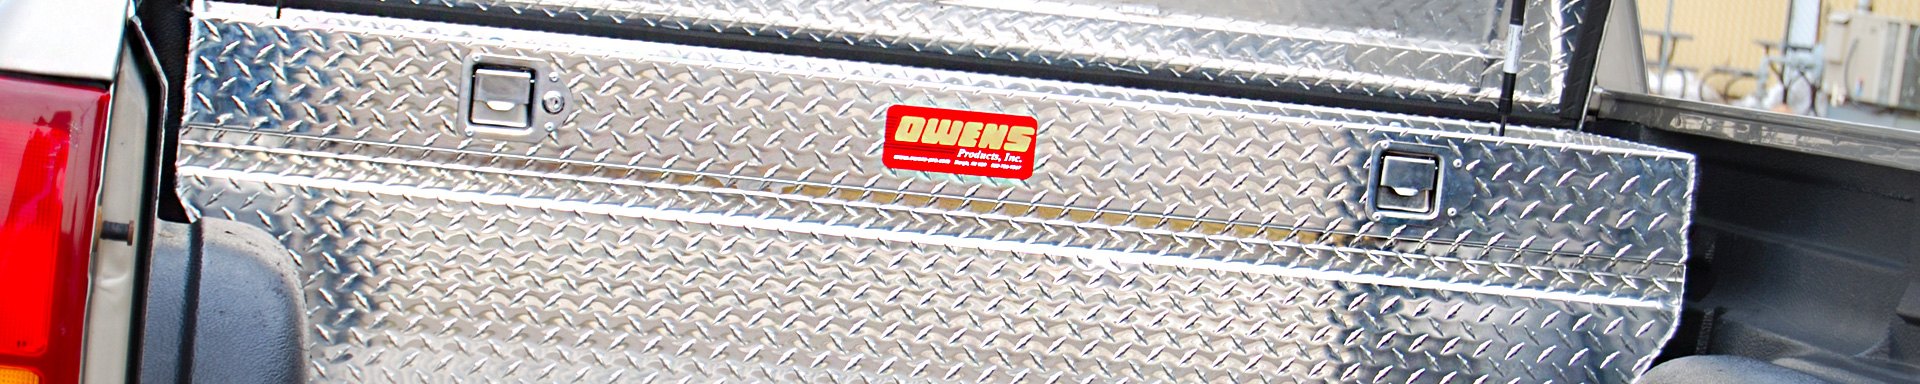 Owens Tool & Battery Boxes